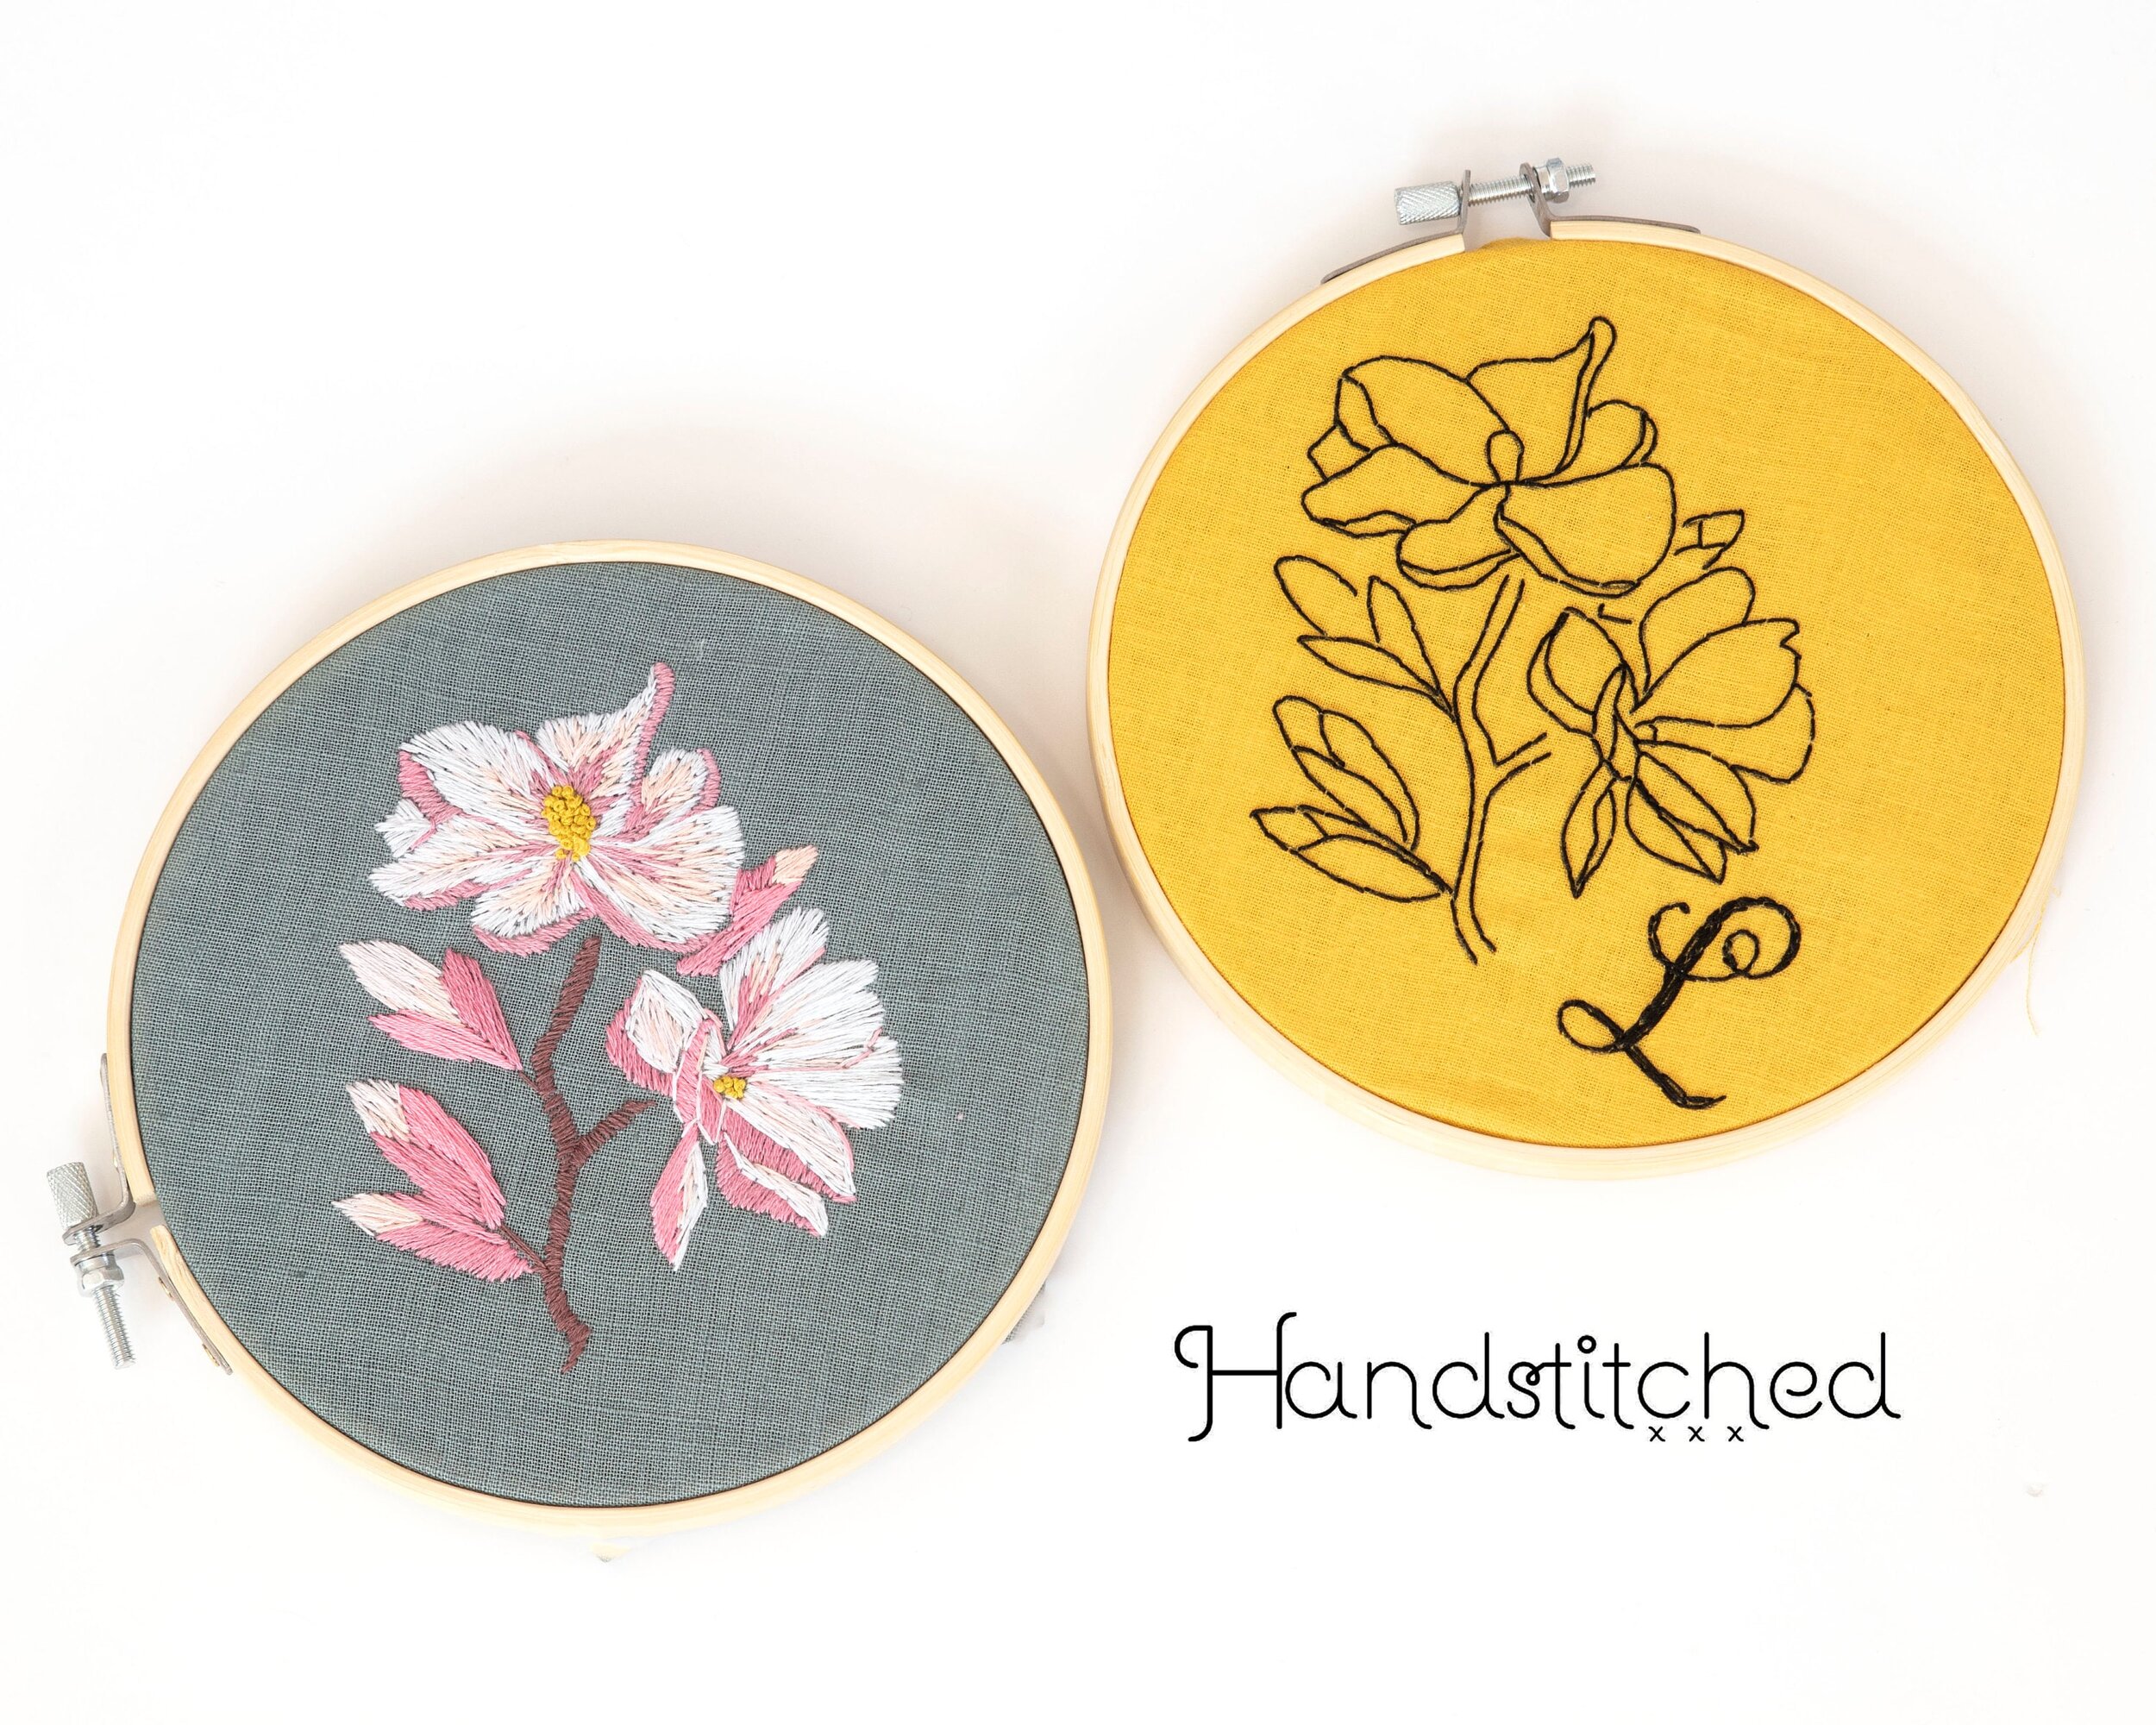 Magnolia Floral Embroidery Kit - DIY craft kit - DIY Embroidery